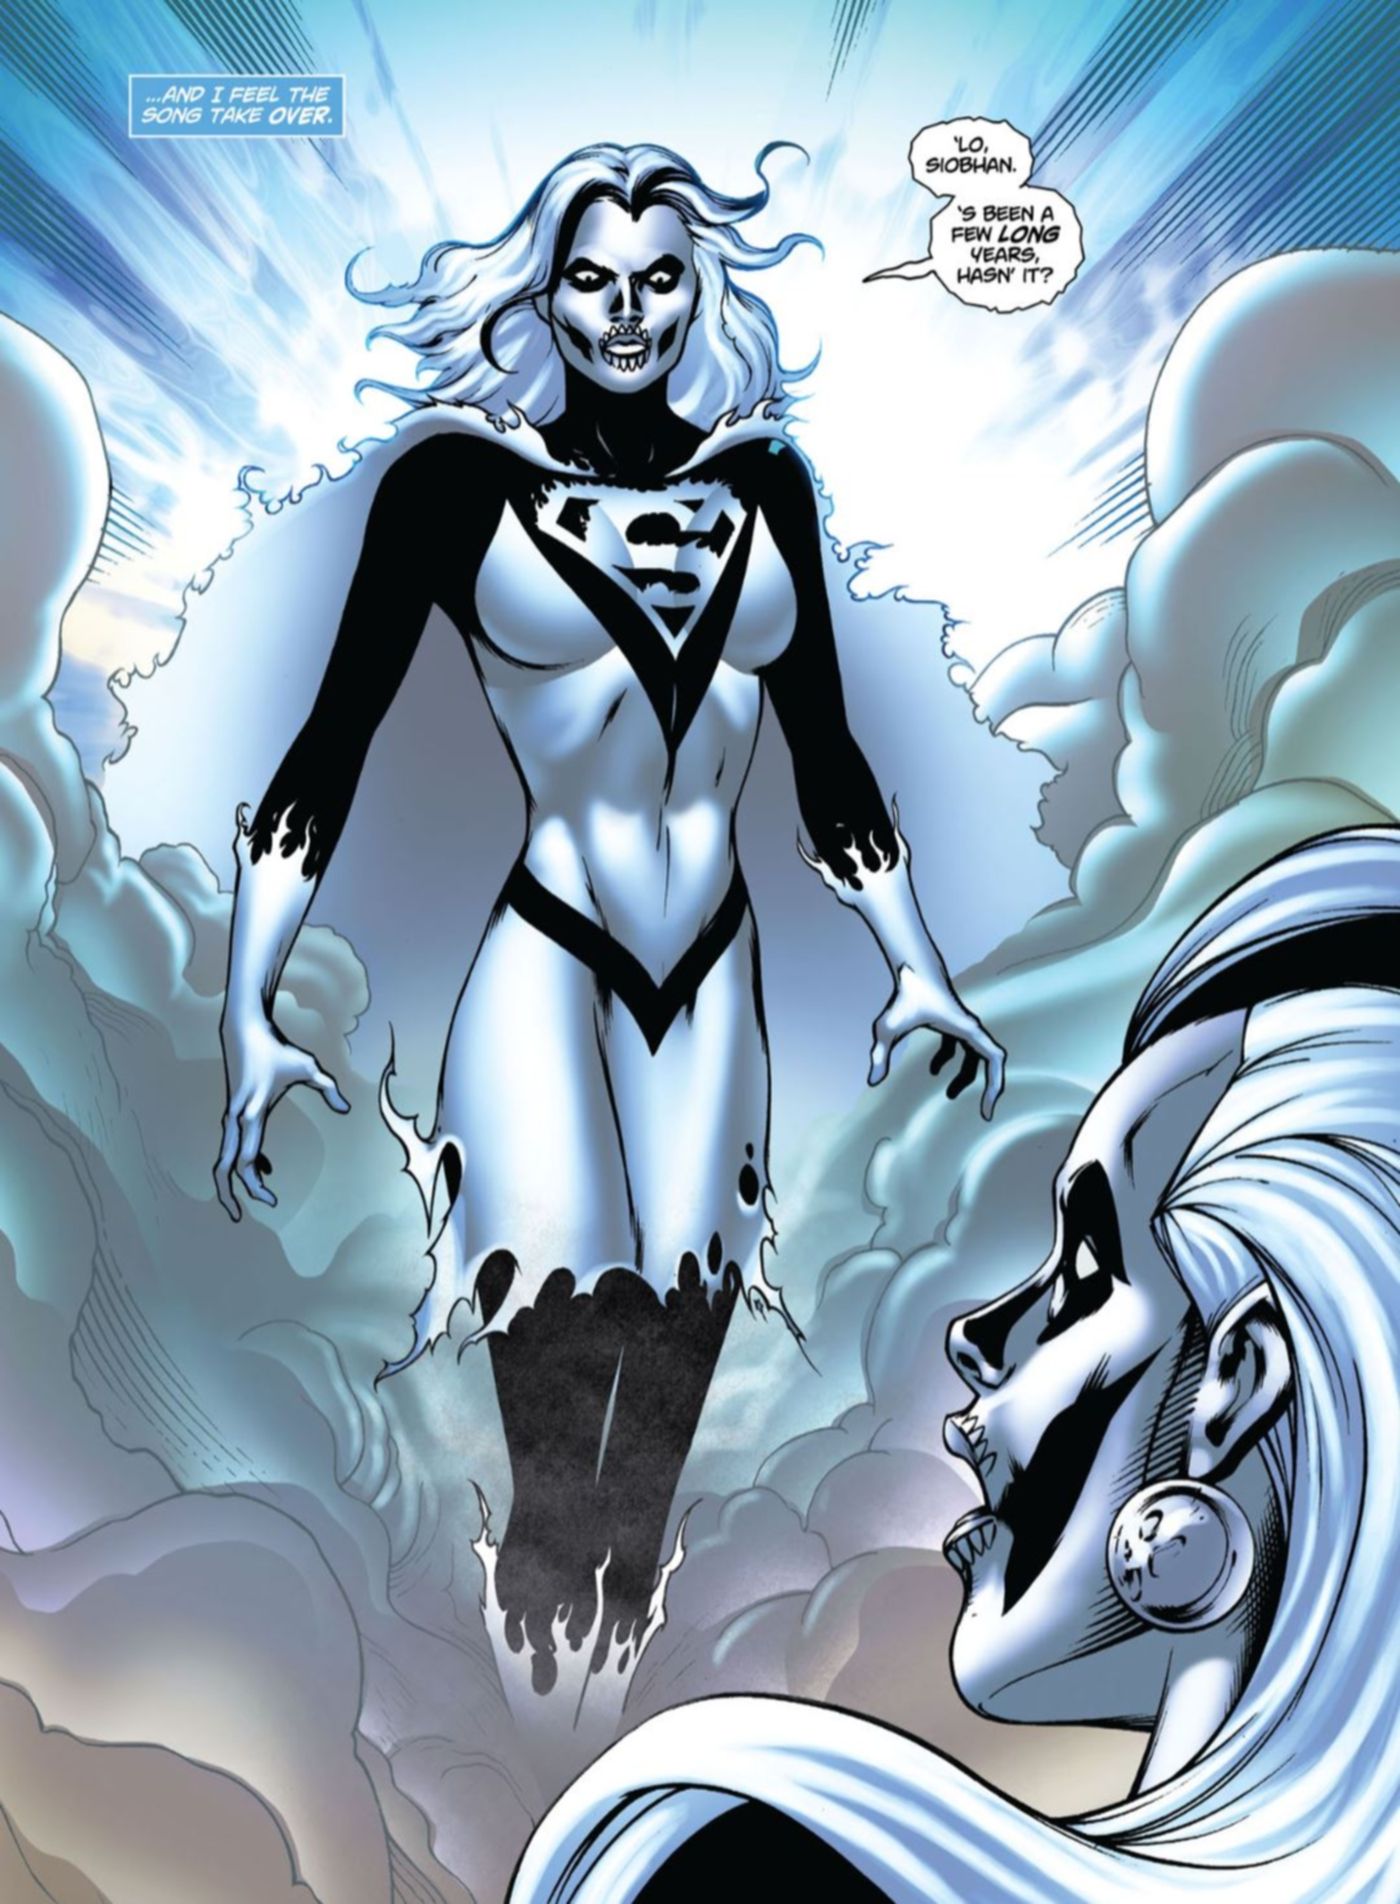 Supergirl’s Most Powerful Form Makes Her a Literal Horror Monster